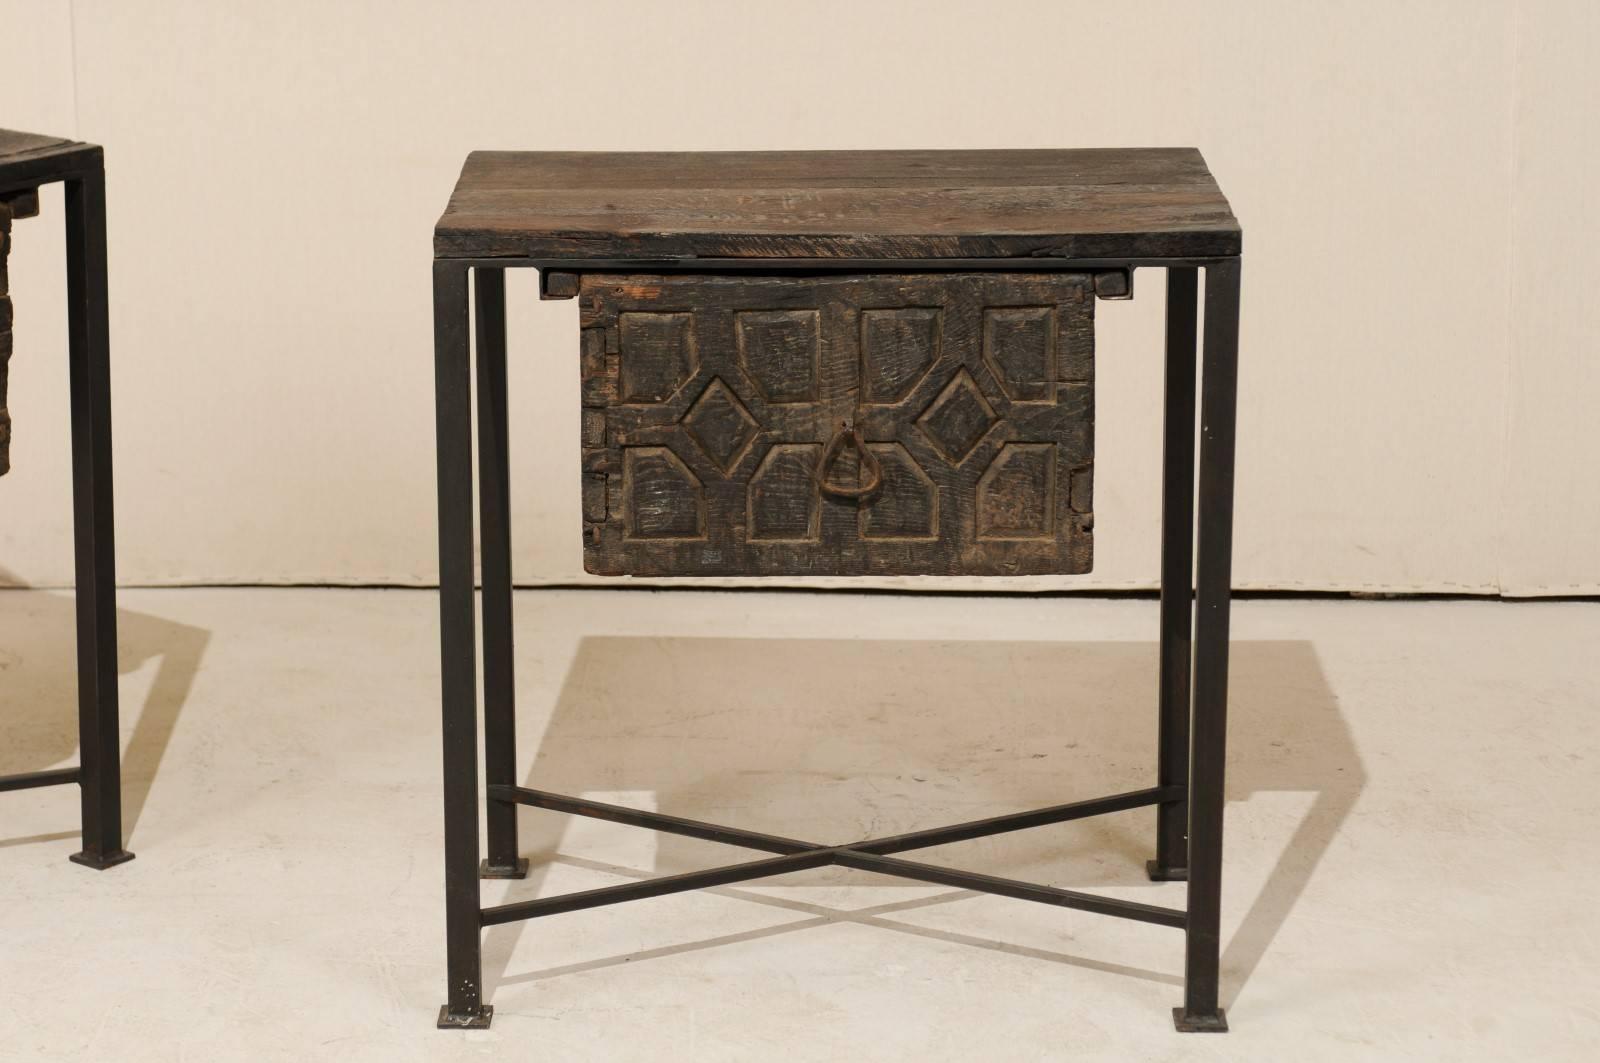 Hand-Carved Pair of 18th Century Spanish Wood Chests on Iron Bases with Geometric Carvings